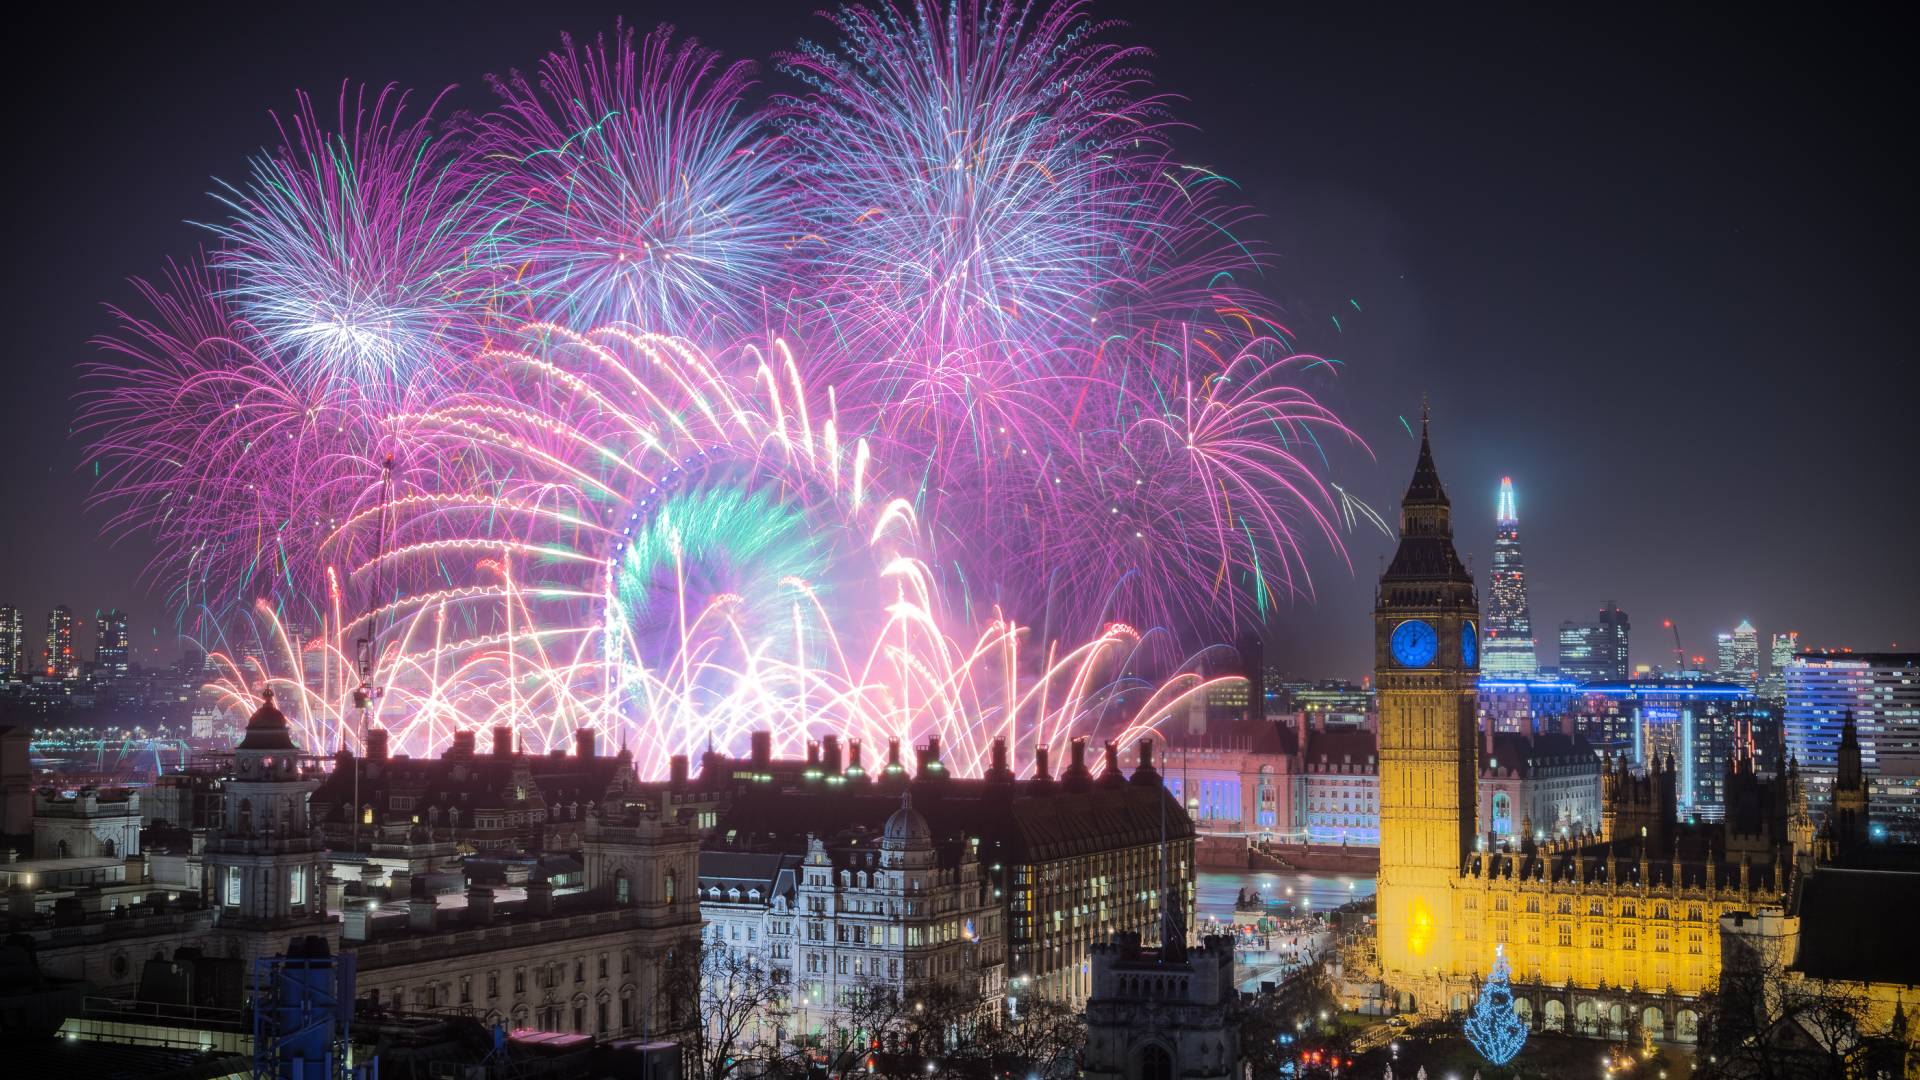 Fireworks exploding in night sky with the Houses of Parliament and Big Ben in the foreground